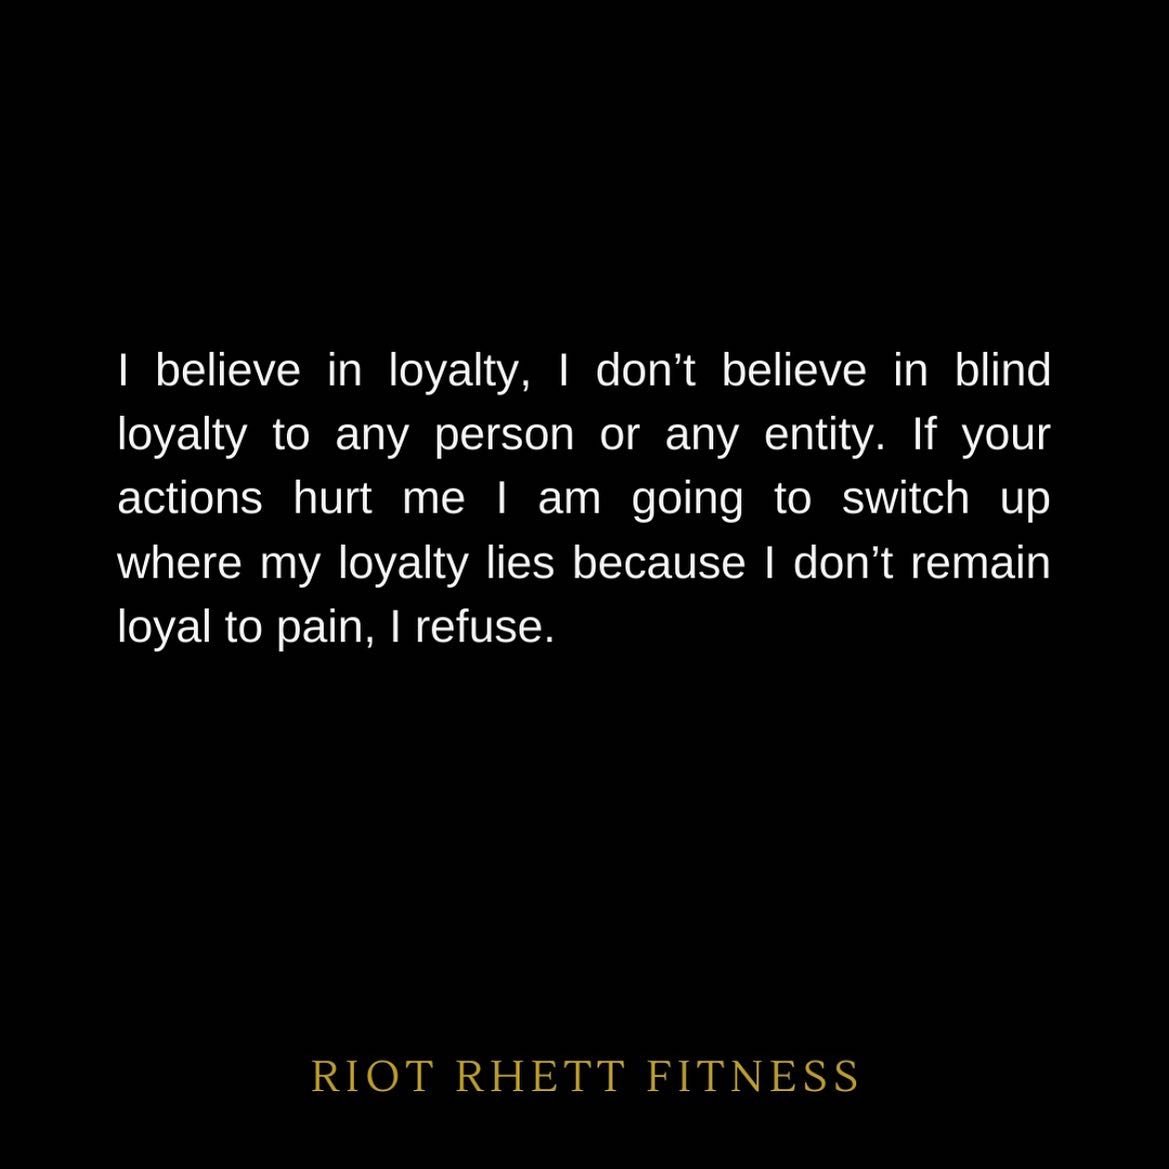 I believe in loyalty, I don't believe in blind loyalty to any person or any entity. If your actions hurt me I am going to switch up where my loyalty lies because I don't remain loyal to pain, I refuse.